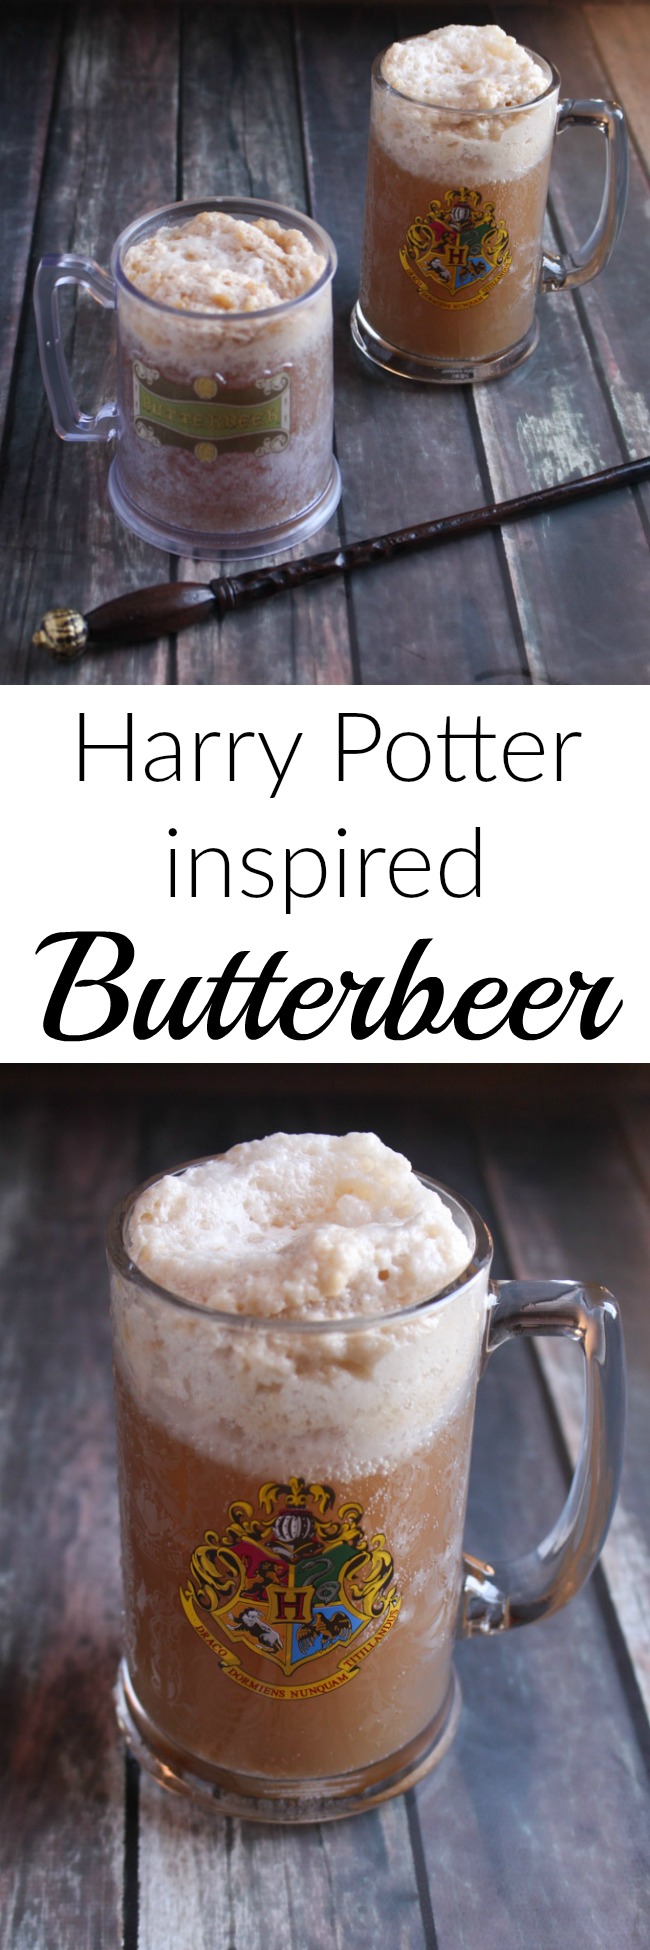 Inspired by the Harry Potter series, this recipe for butterbeer is a sweet, creamy, butterscotch treat. Whip up a batch, and cozy up with your favorite Harry Potter film or book. A great way to bring the series to life!